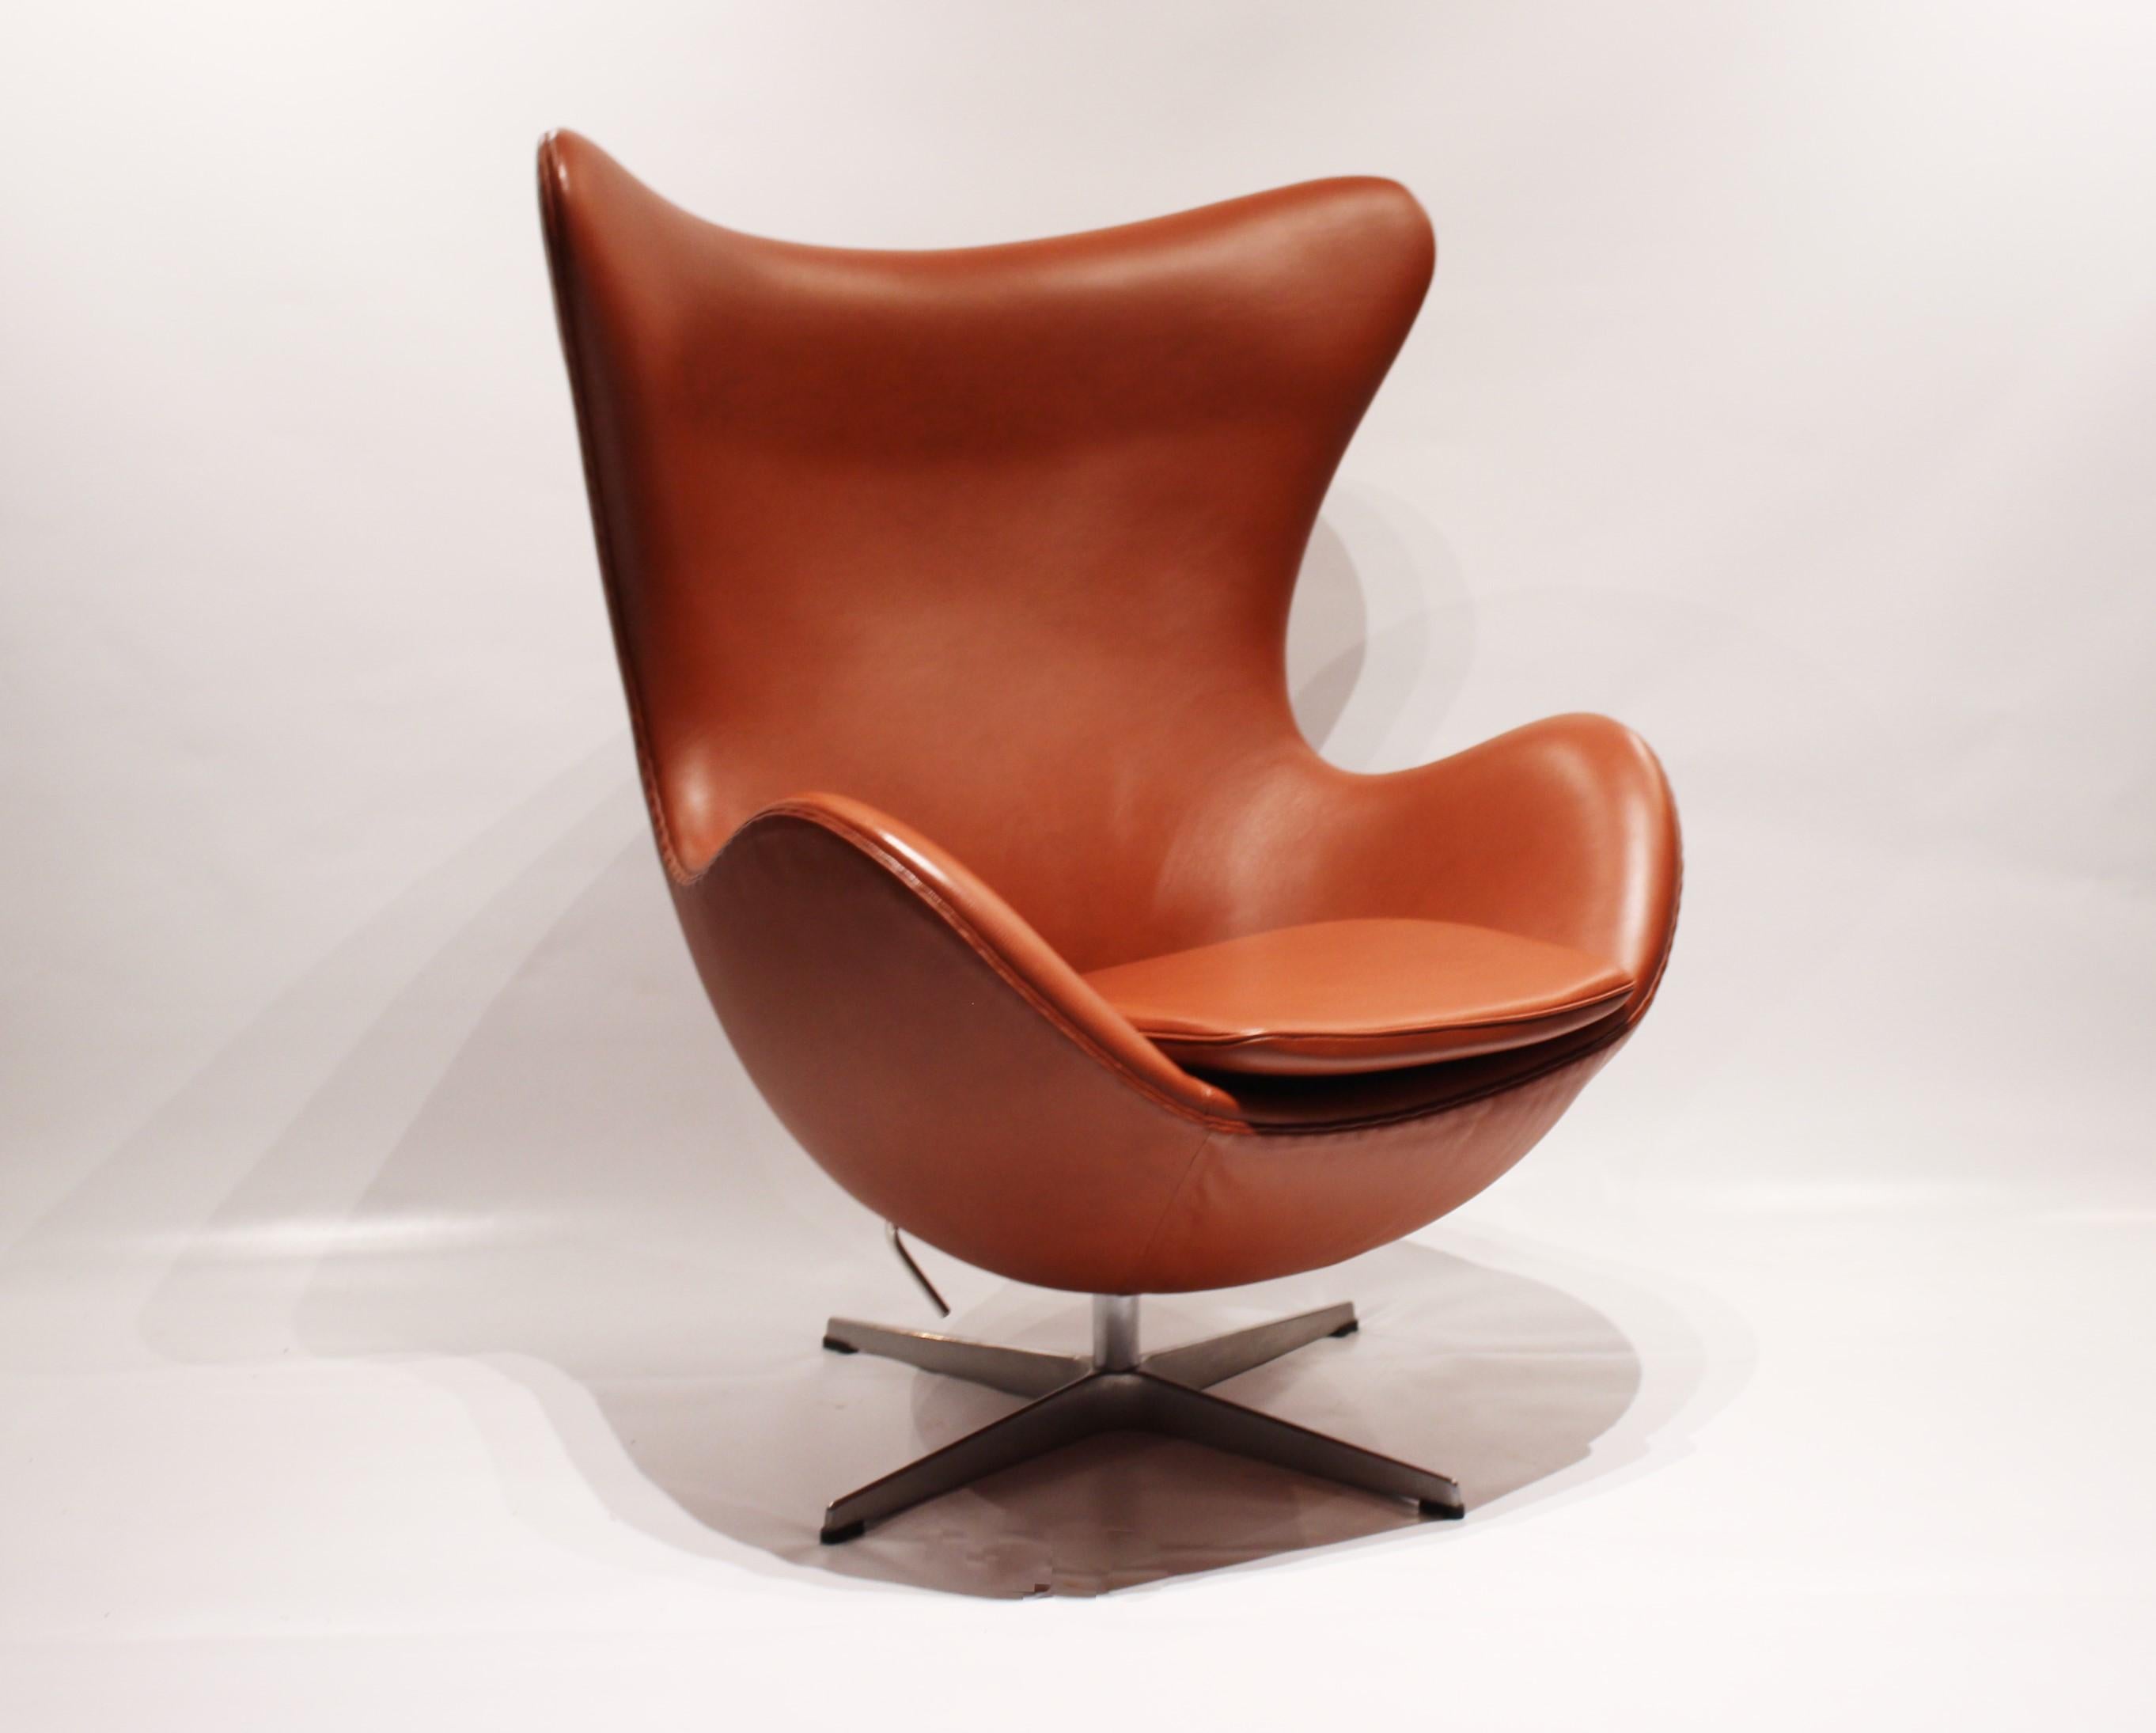 The Egg, model 3316, designed by Arne Jacobsen in 1958 and manufactured by Fritz Hansen in 2016. The chair is upholstered with cognac colored leather and is in great vintage condition. The chair was designed along with the Swan chair for a project